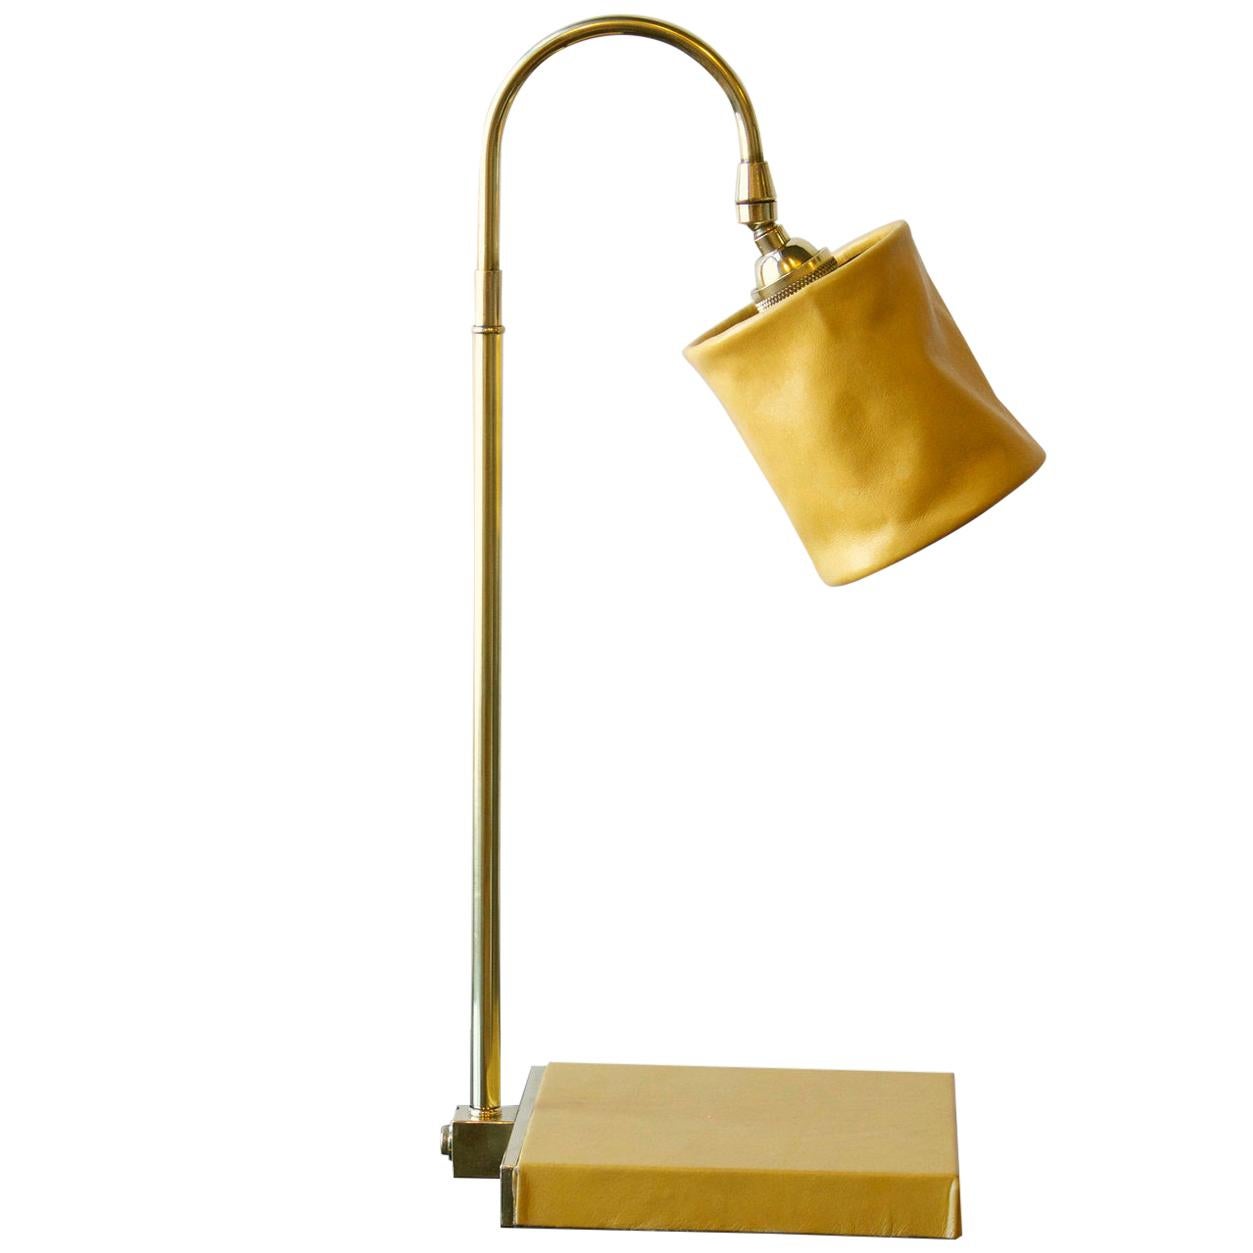 Series 01 Desk Lamp Hand-Dyed Mustard Yellow Leather Polished Un-Lacquered Brass For Sale